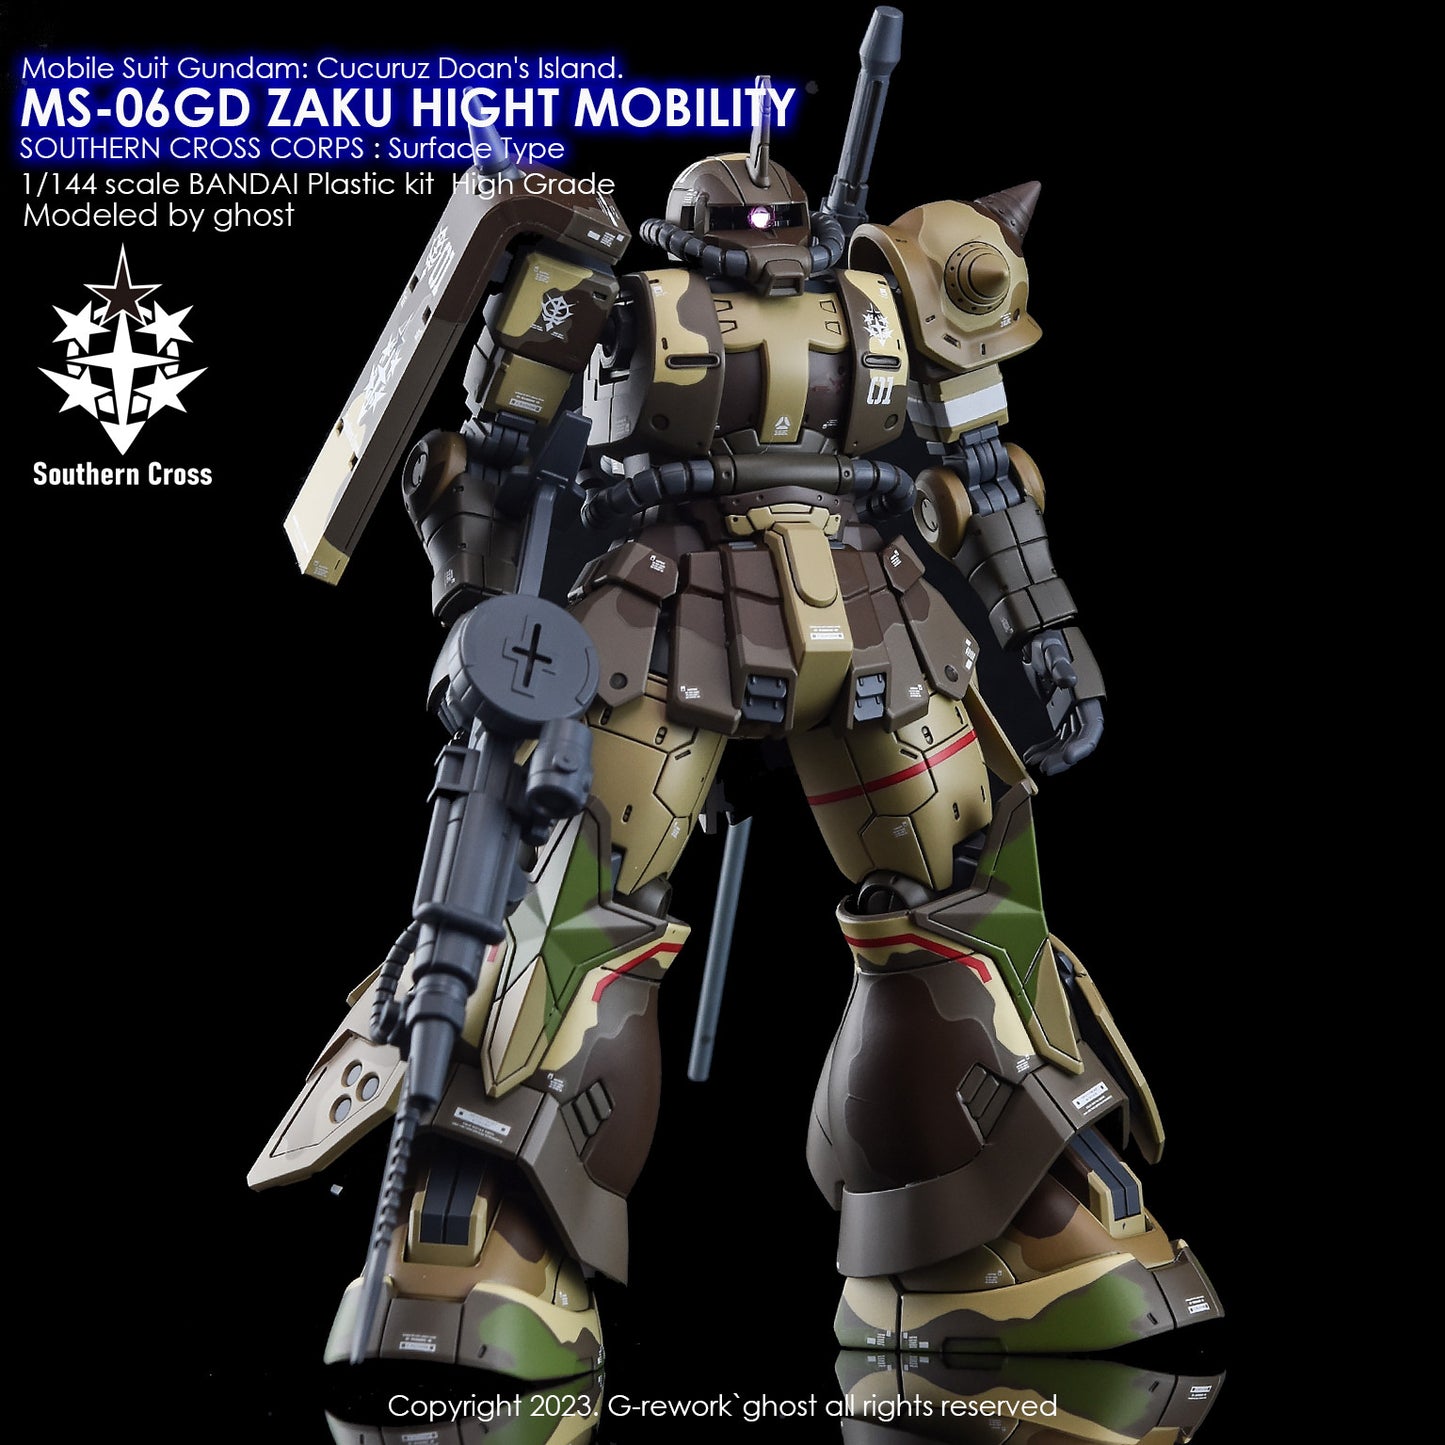 G-Rework [HG] MS-06GD ZAKU HIGHT MOBILITY GROUNT TYPE (water decal)